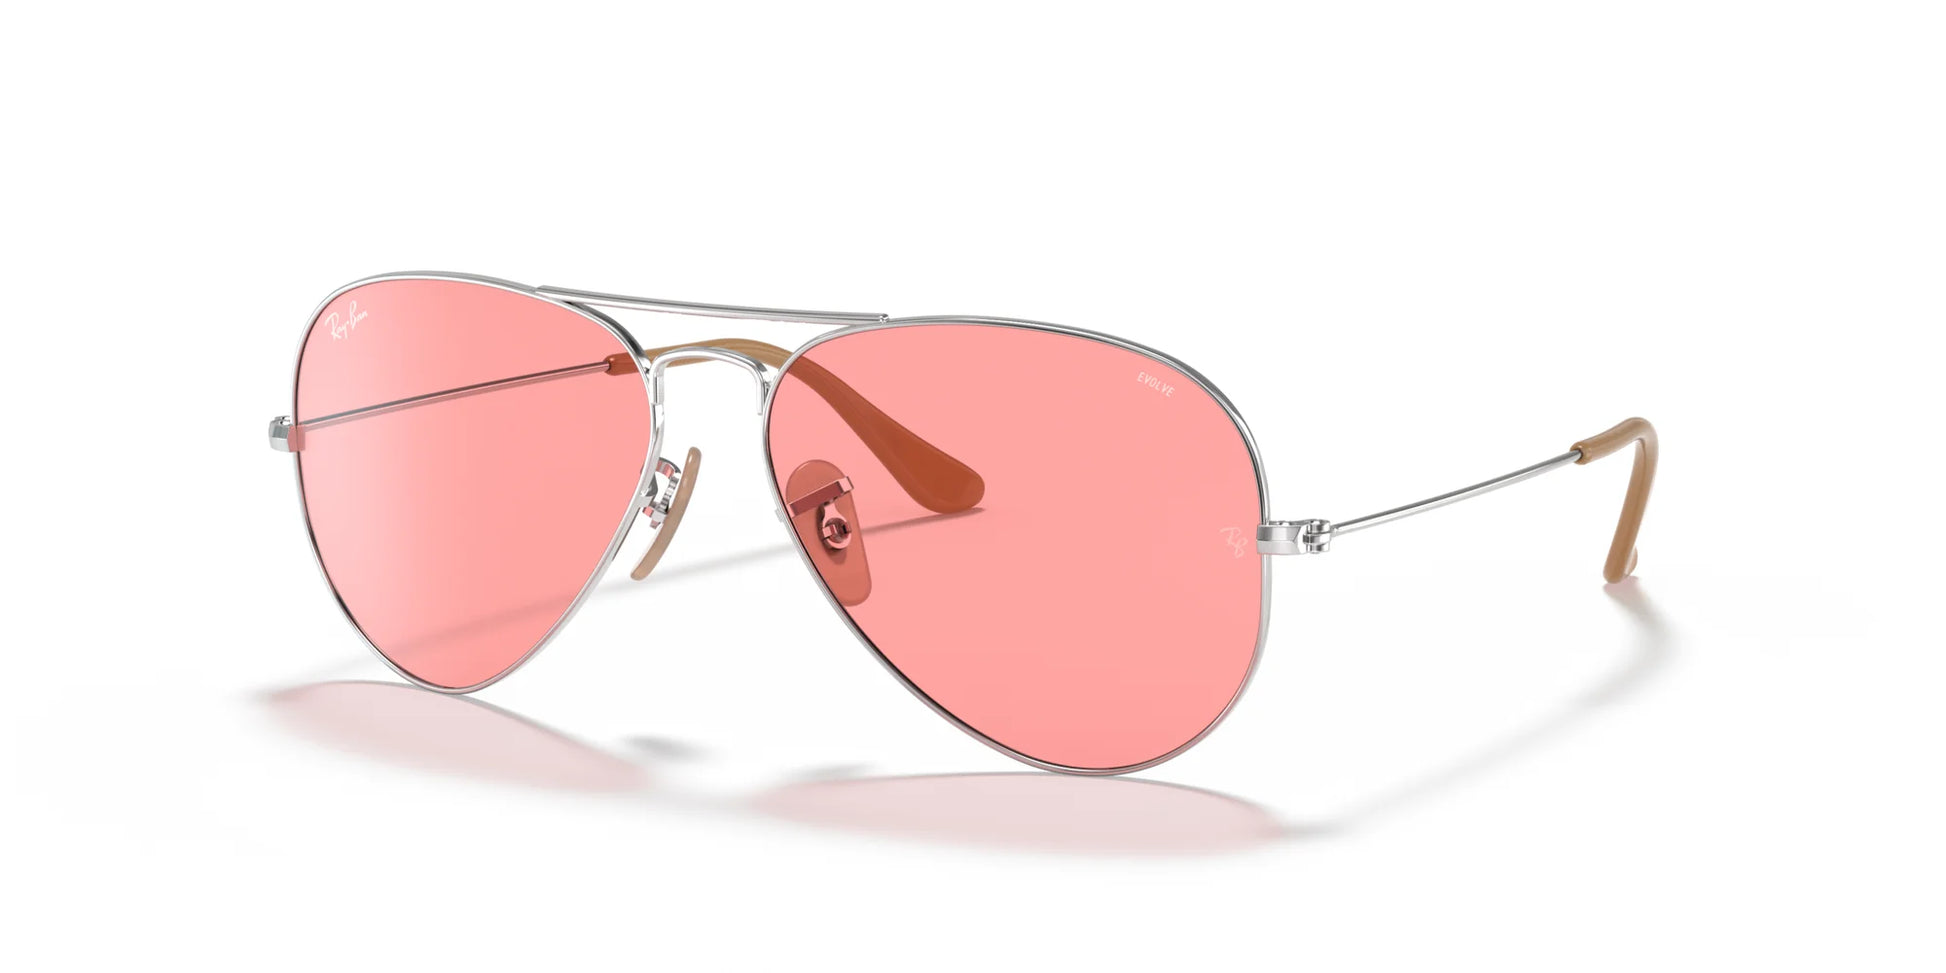 Ray-Ban AVIATOR LARGE METAL RB3025 Sunglasses | Size 58 Silver / Pink